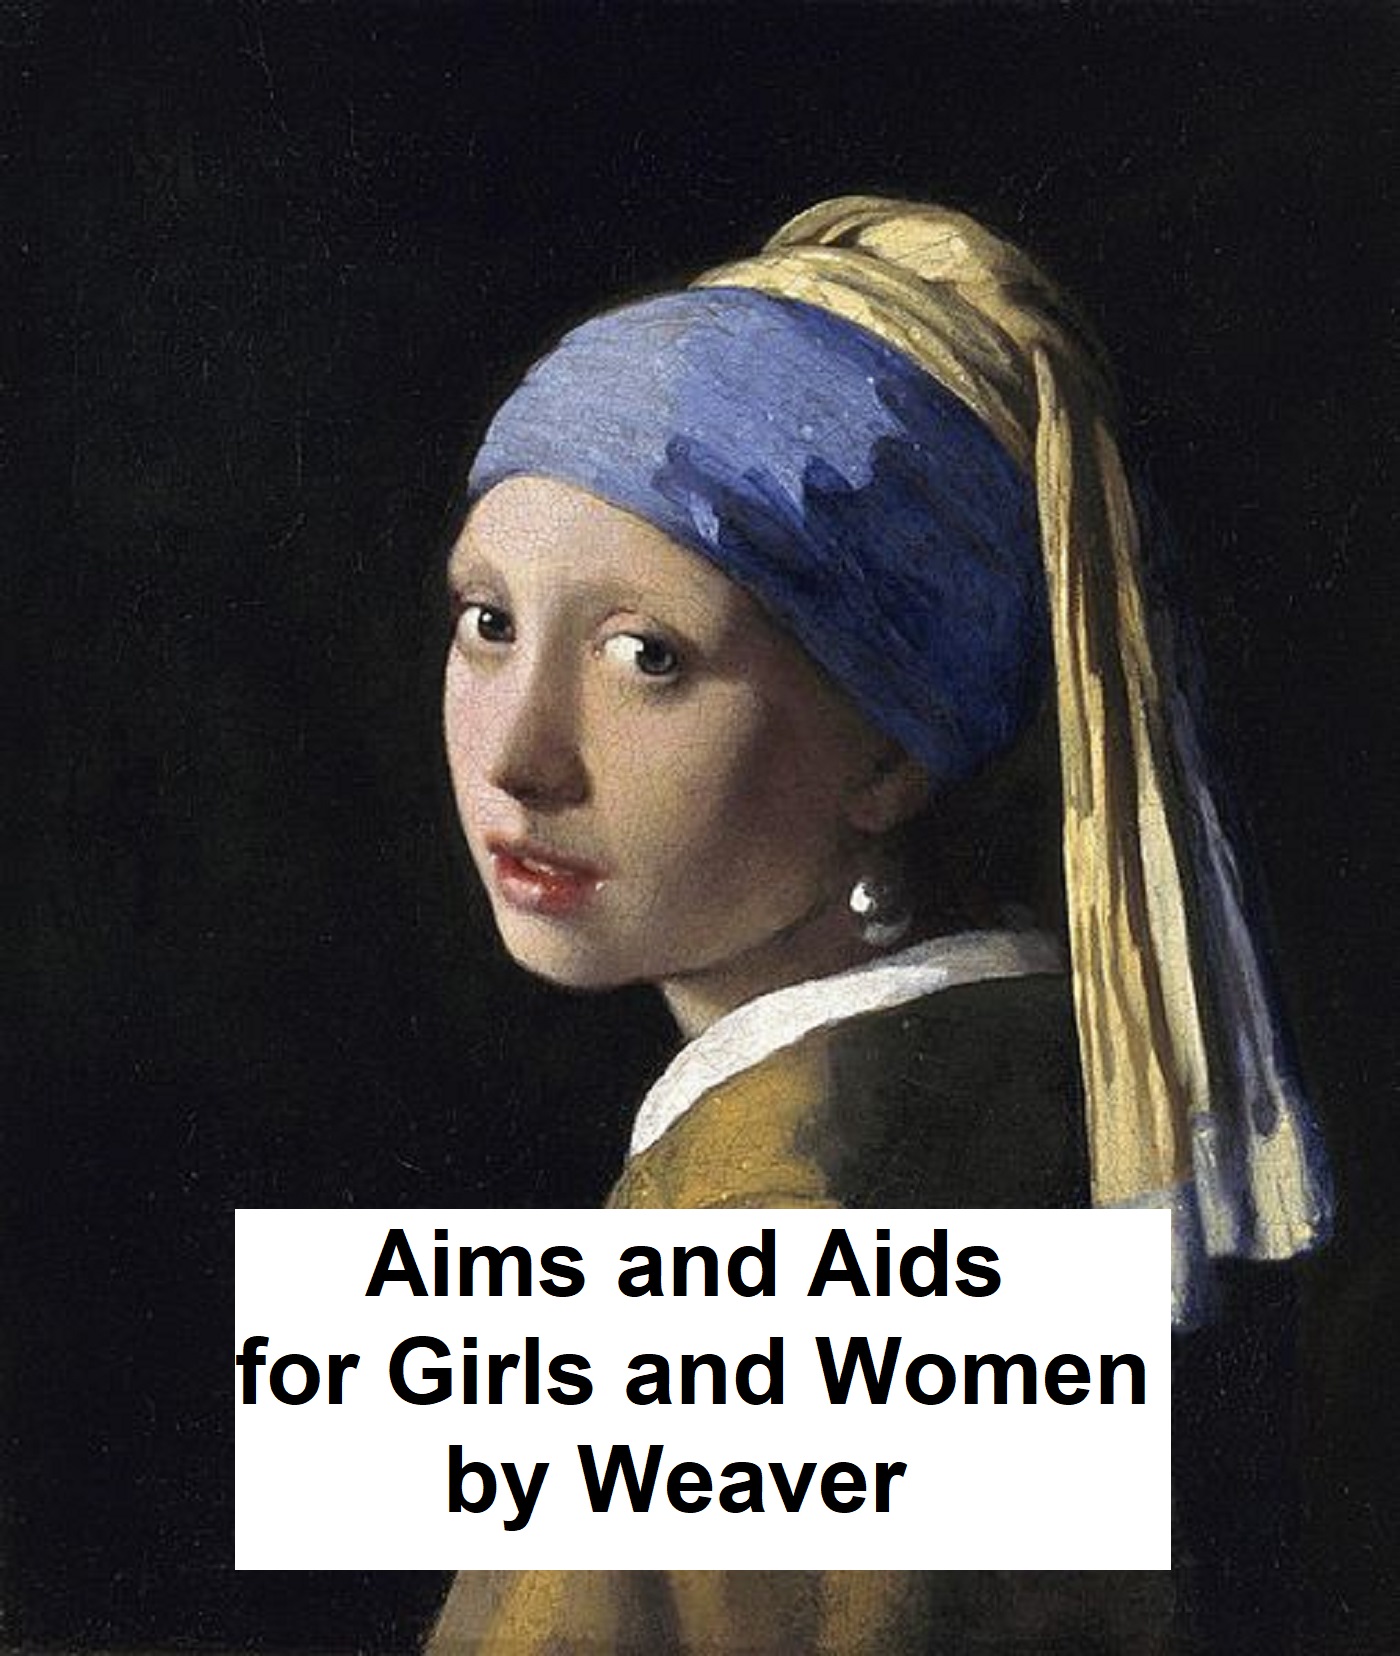 Aims and Aids for Girls and Women